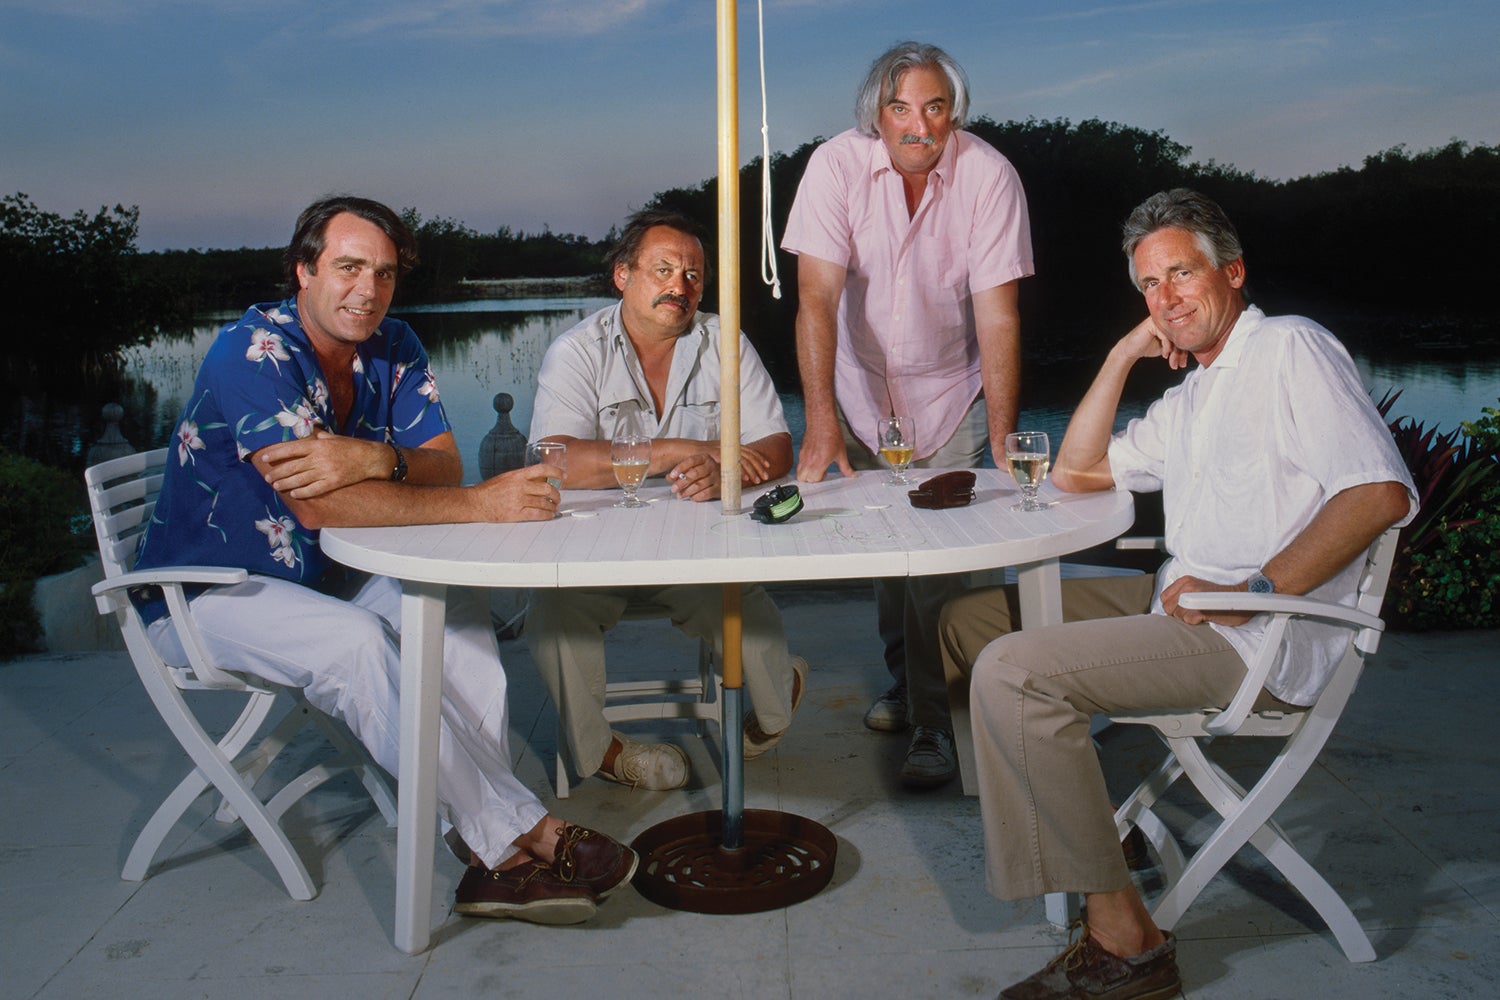 four men with drinks pose around an outdoor table with a creek in the background